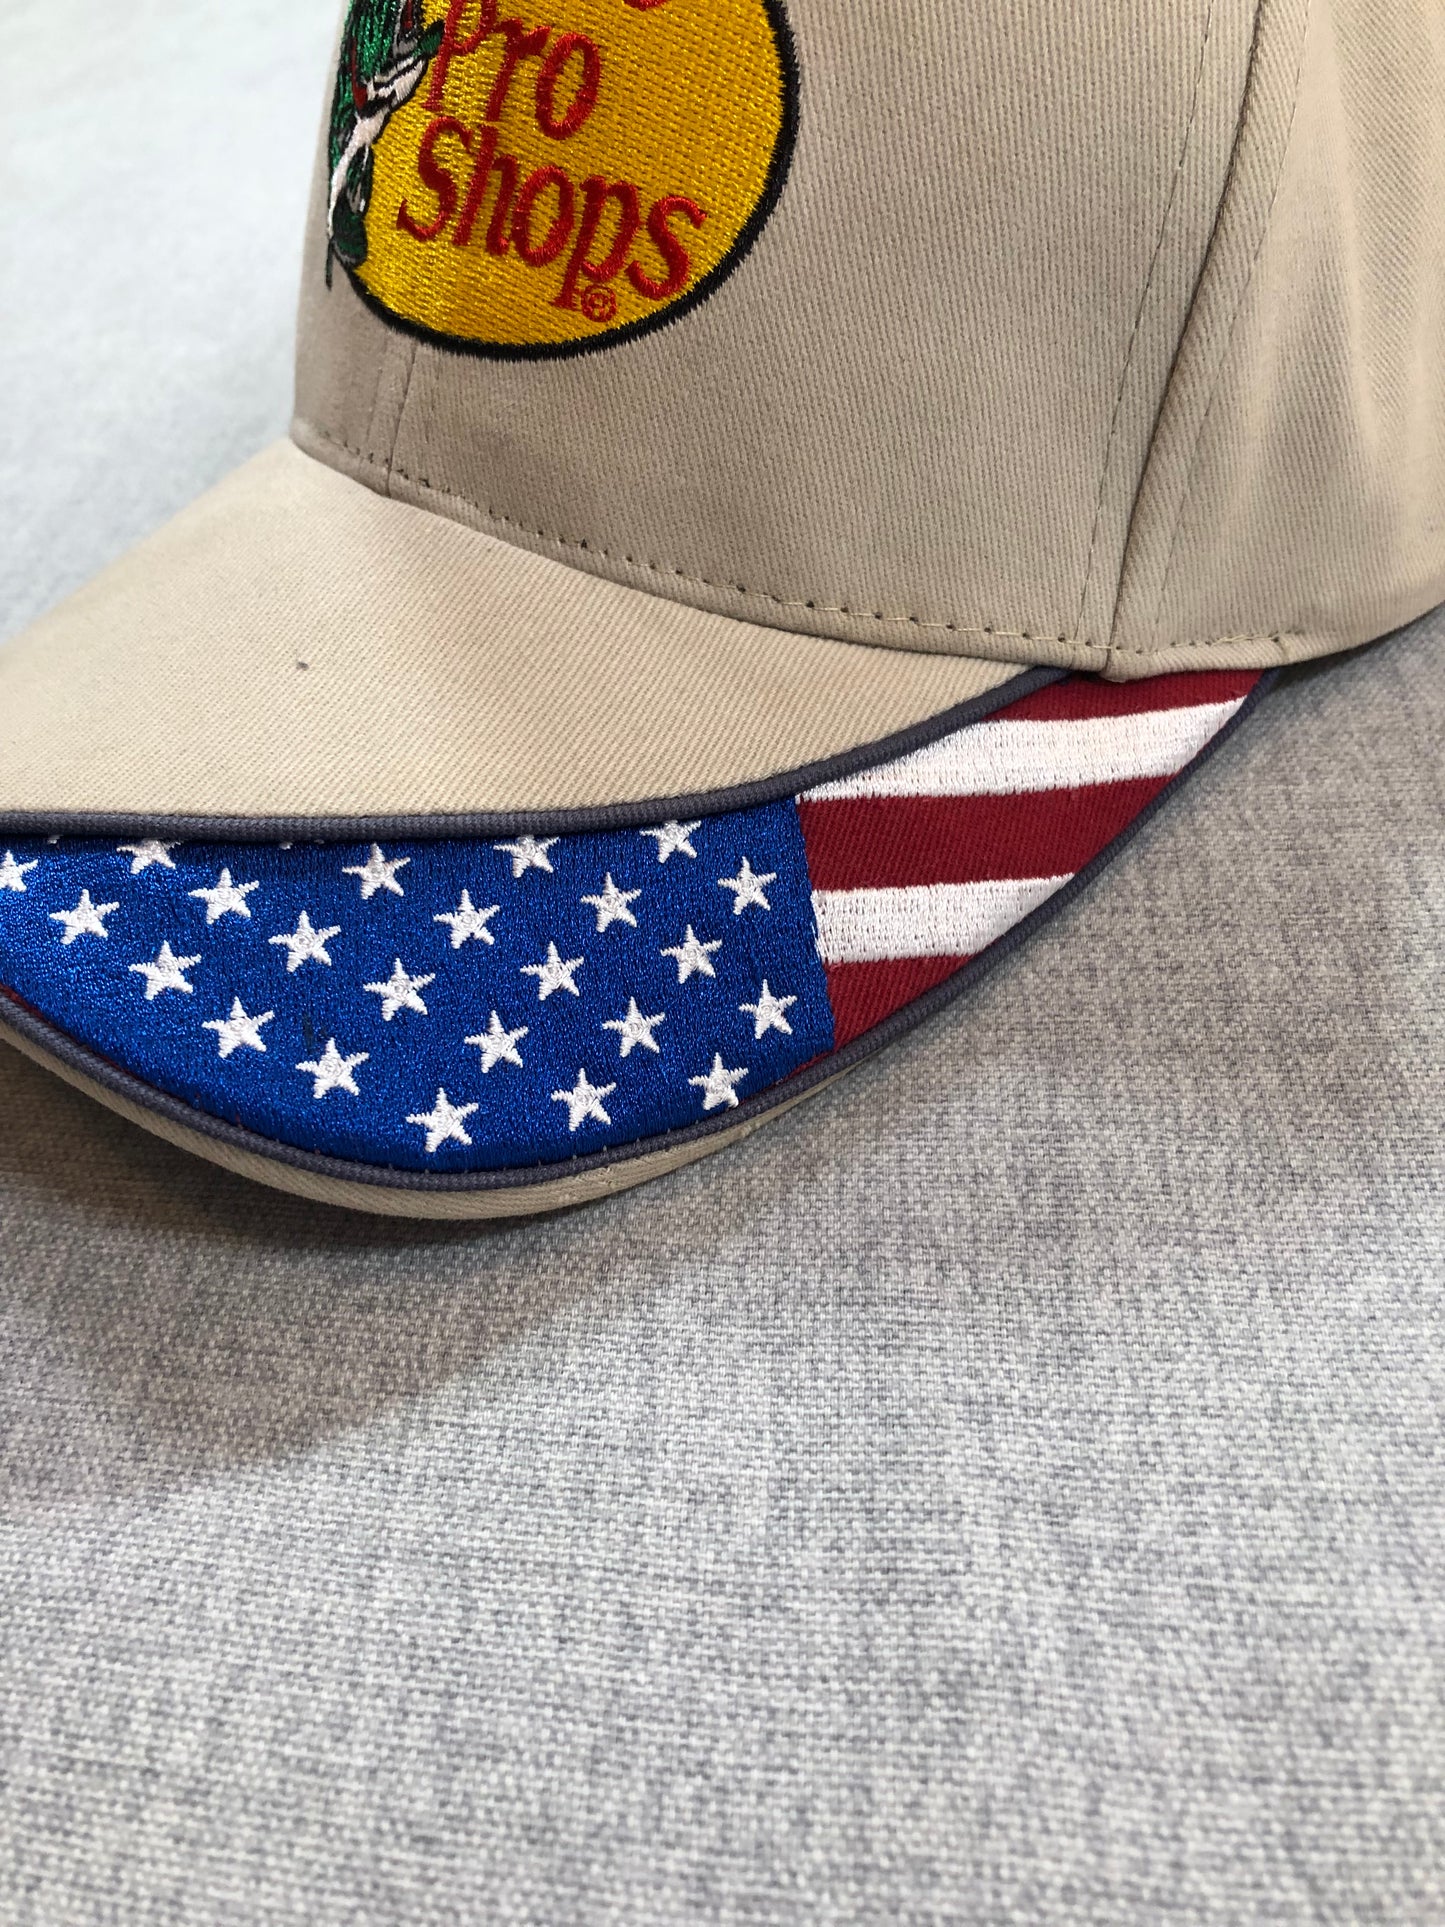 Bass Pro Shops Hat Embroidered American Flag Cap Fishing 4th of July PREOWNED